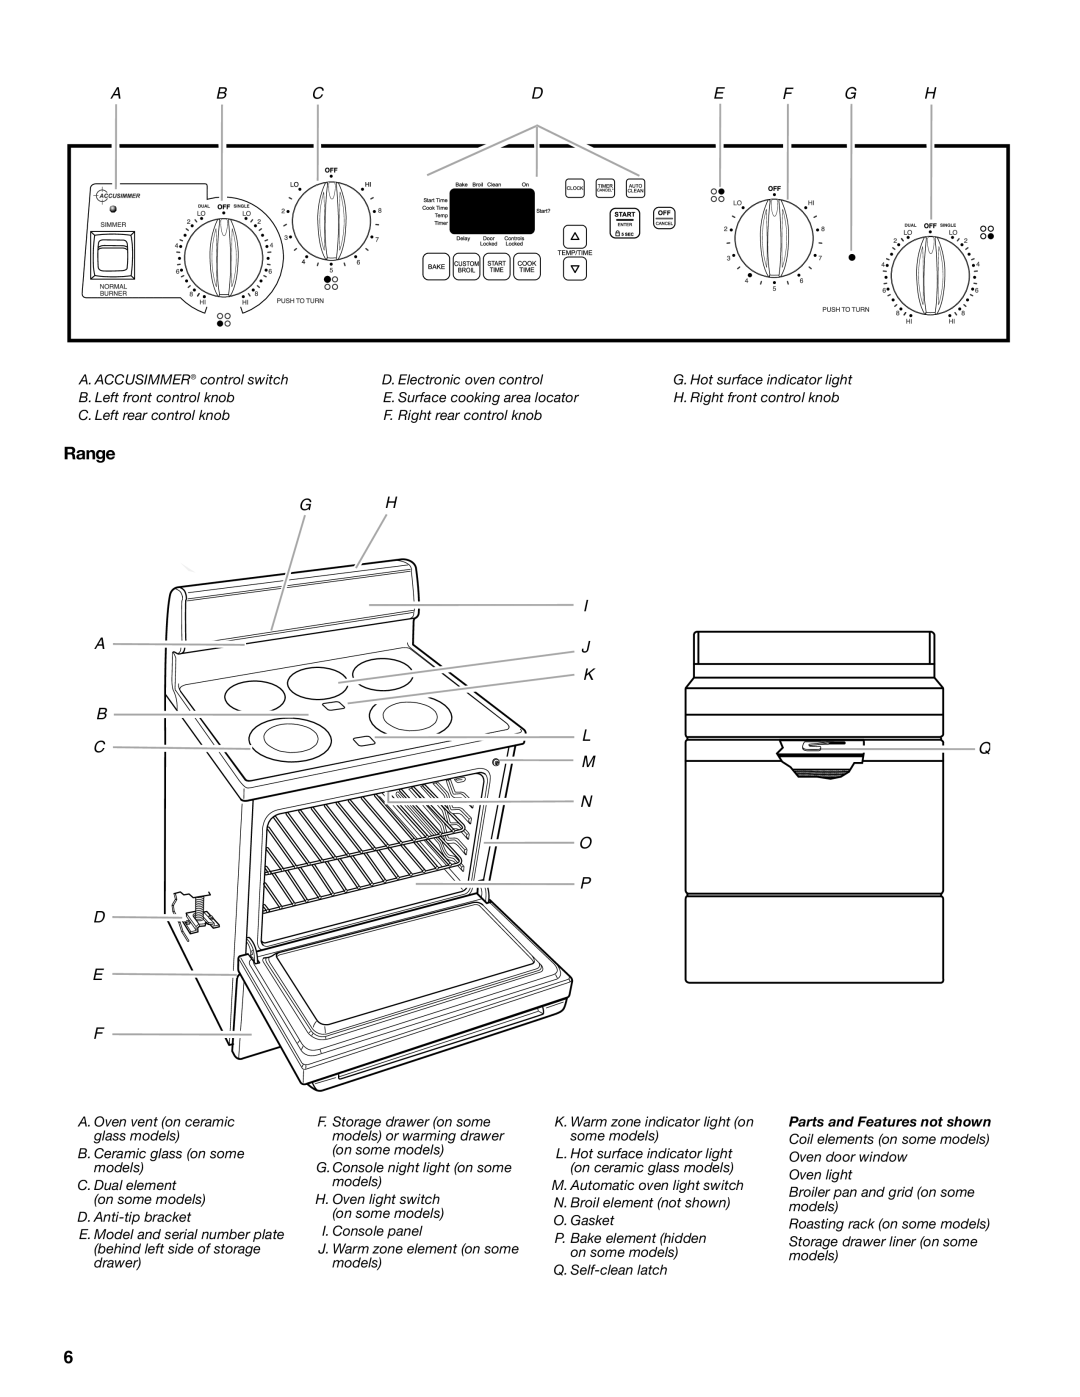 Whirlpool 9762365 manual Range, Abcde F G H, B L C Q M N O P D E F, Parts and Features not shown 